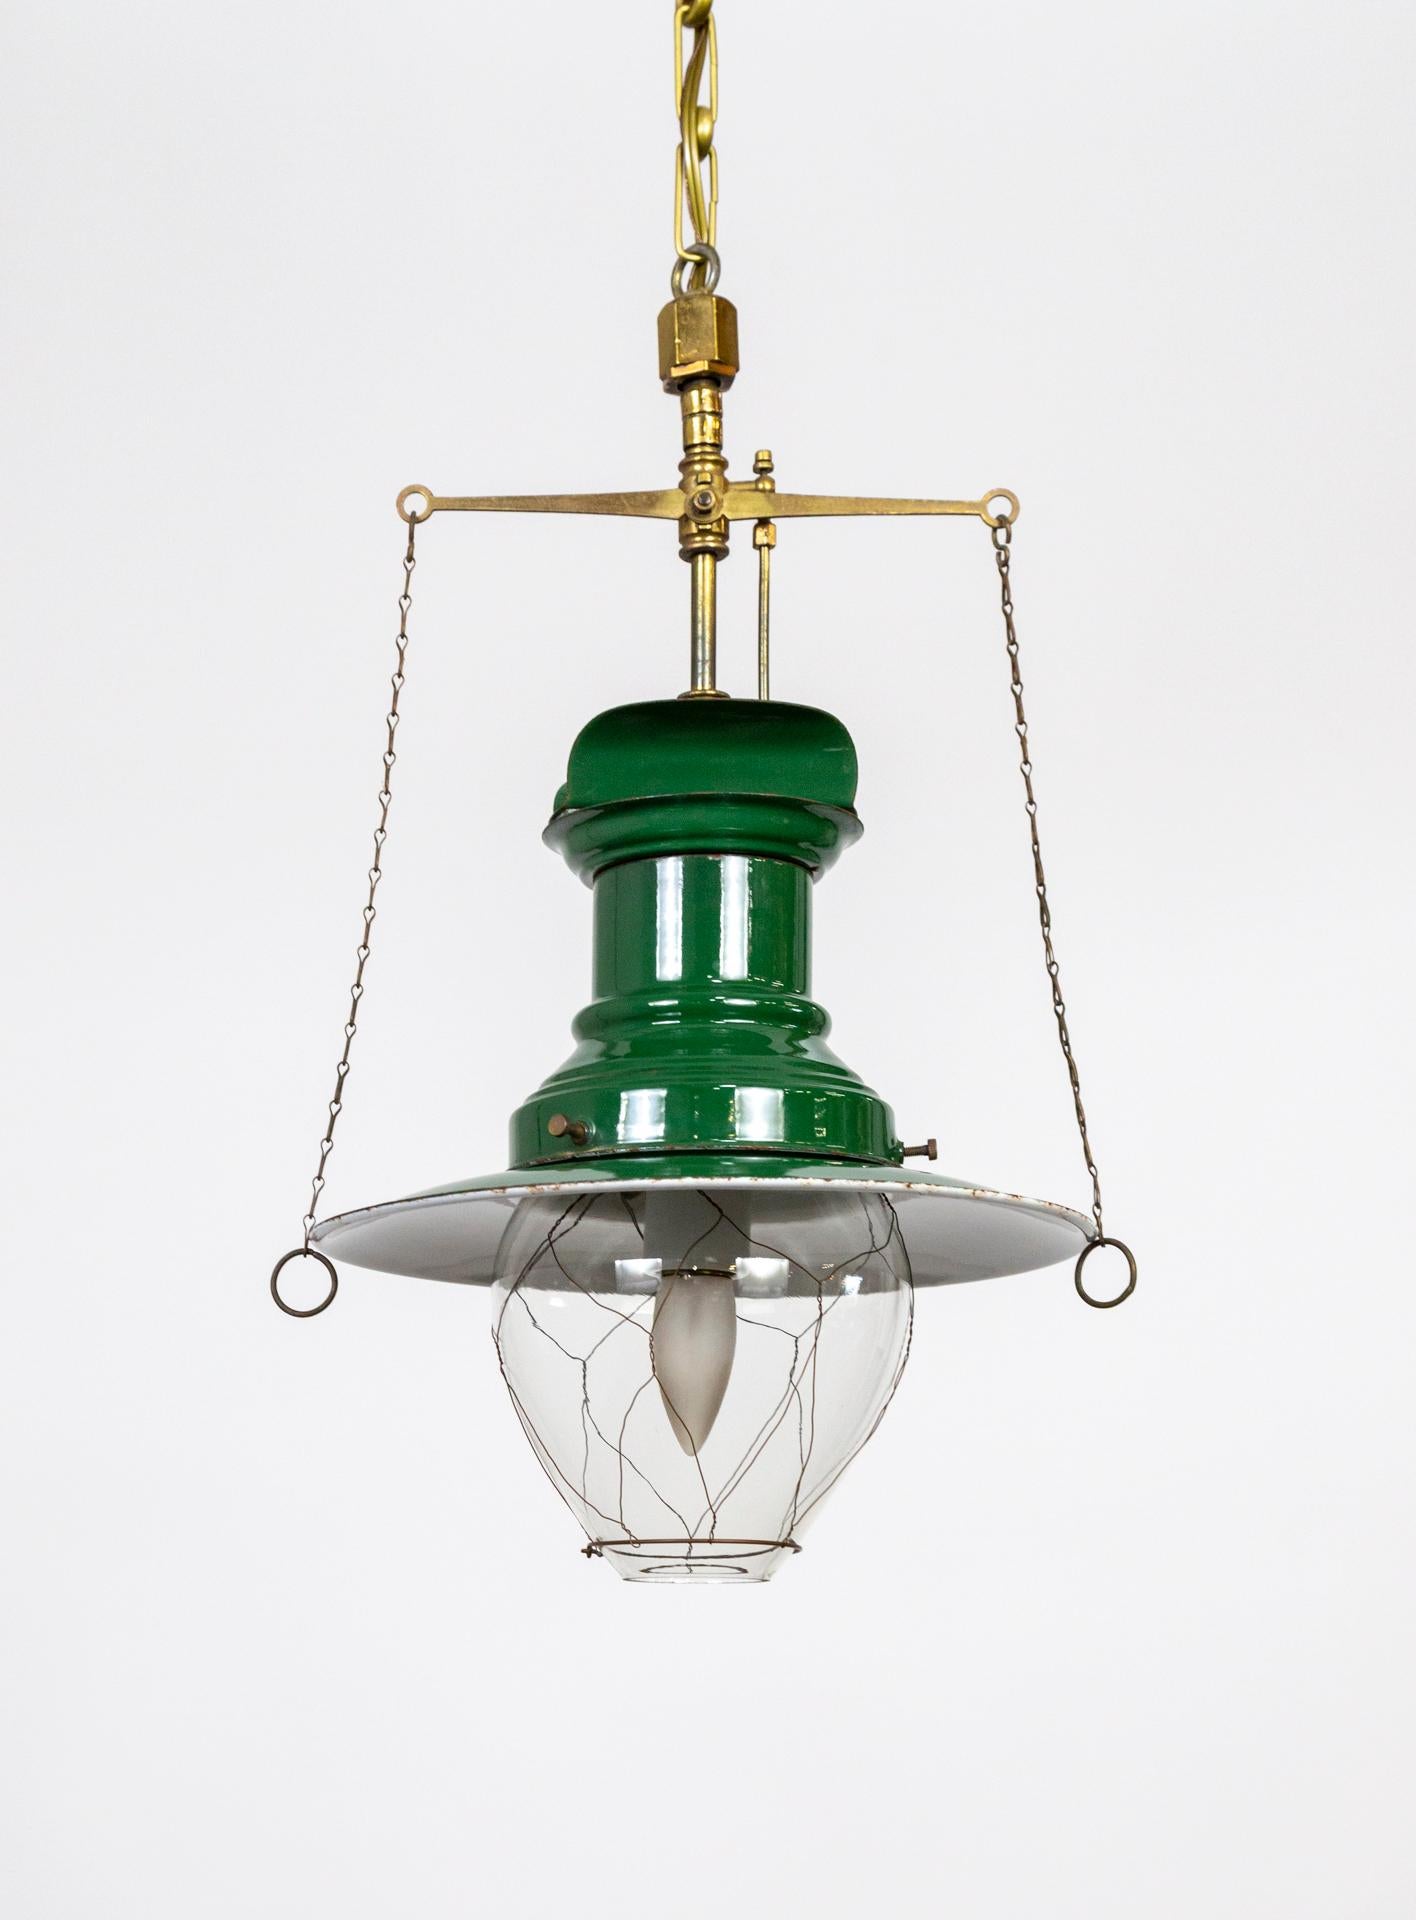 An antique, brass, green and white enameled, nautical lantern; with a wire caged, glass shade. Originally gas, now newly wired to electric. New chain and canopy. 11.5